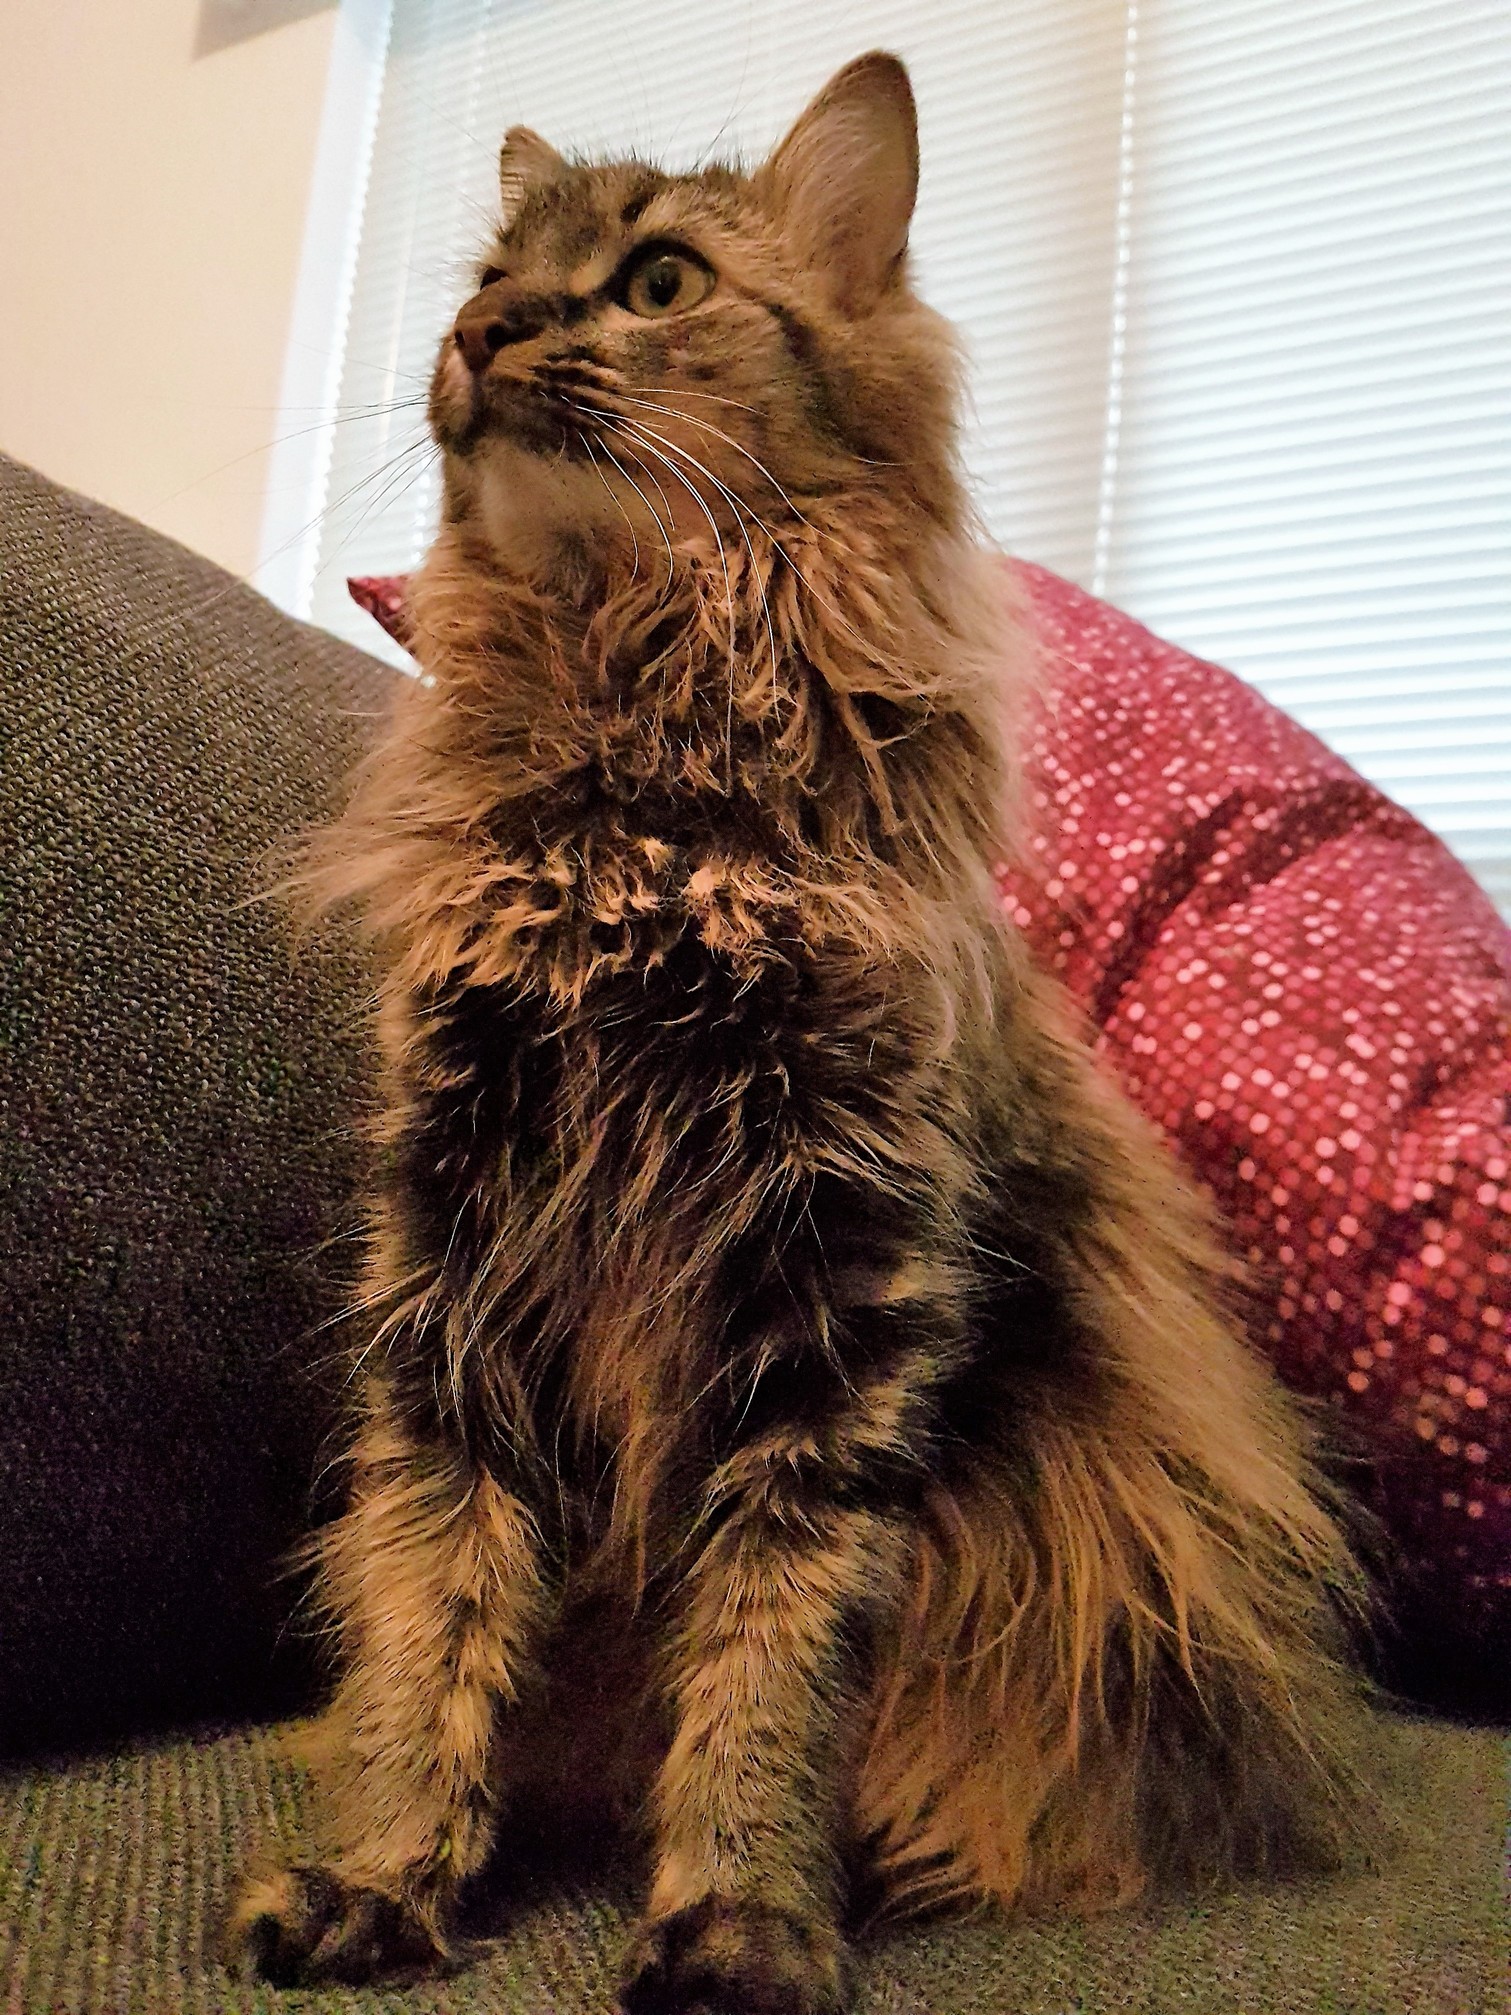 Savannah was being extra majestic today and just a little bit floofy